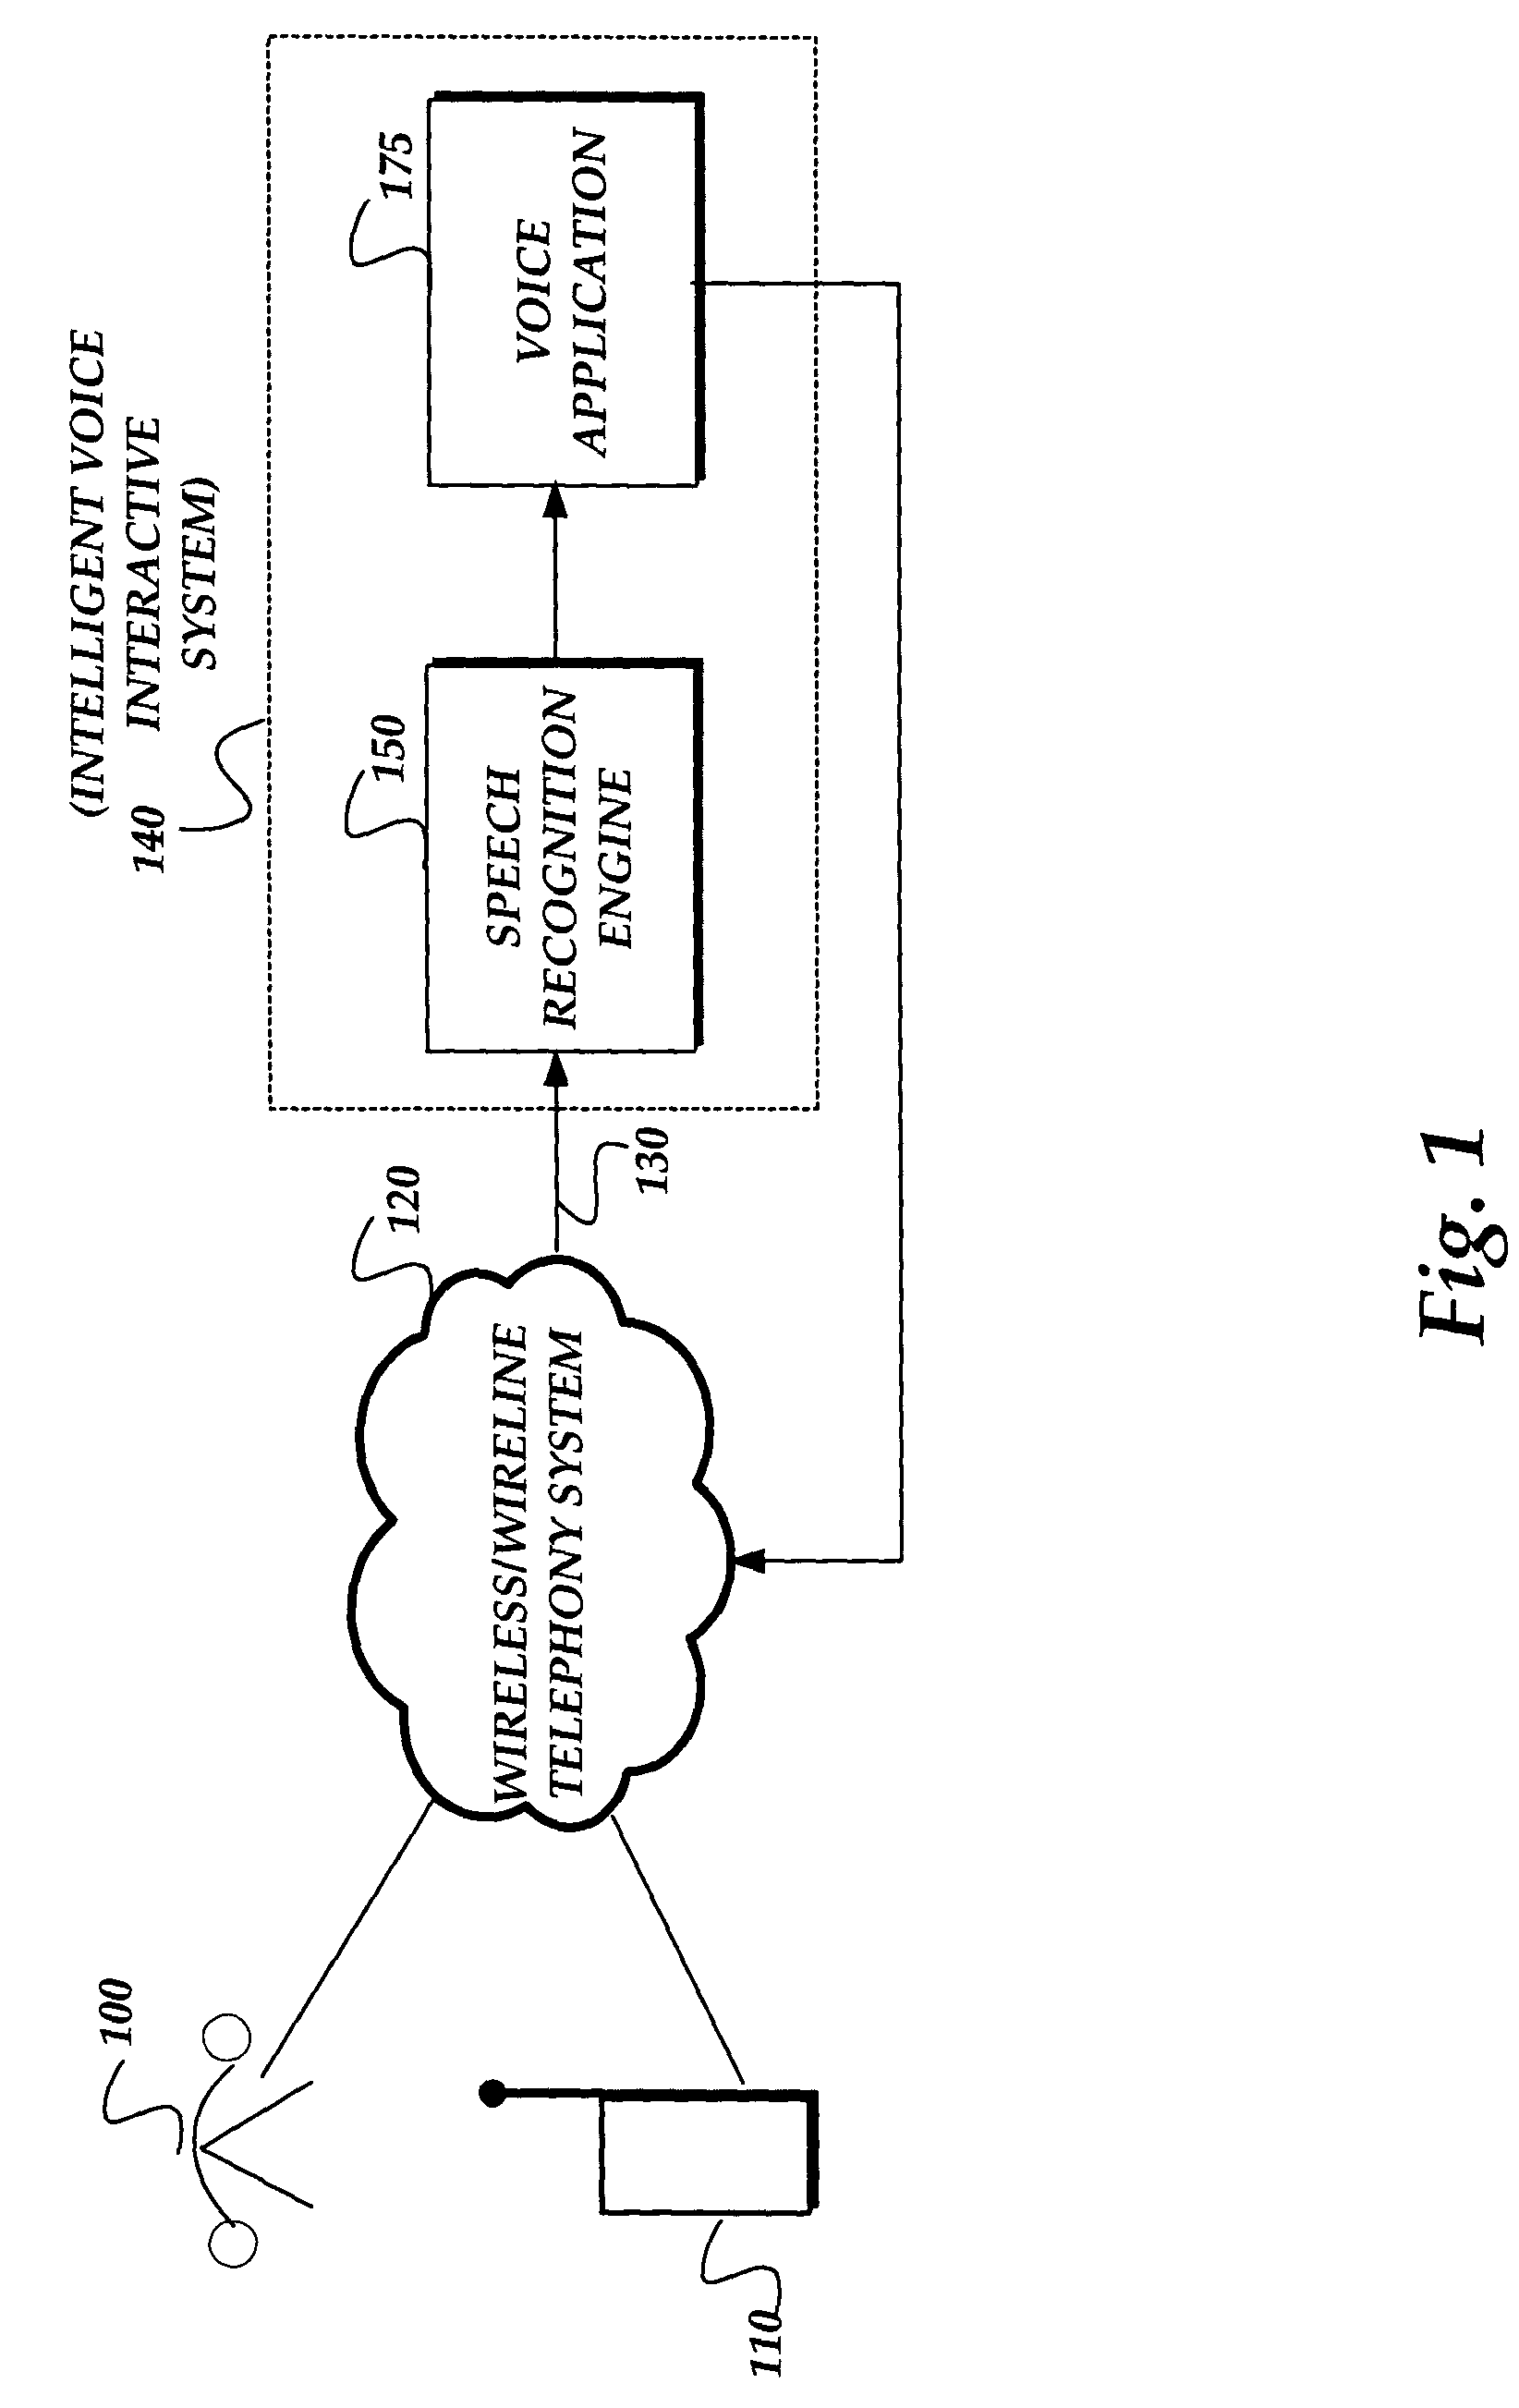 Speech recognition error identification method and system